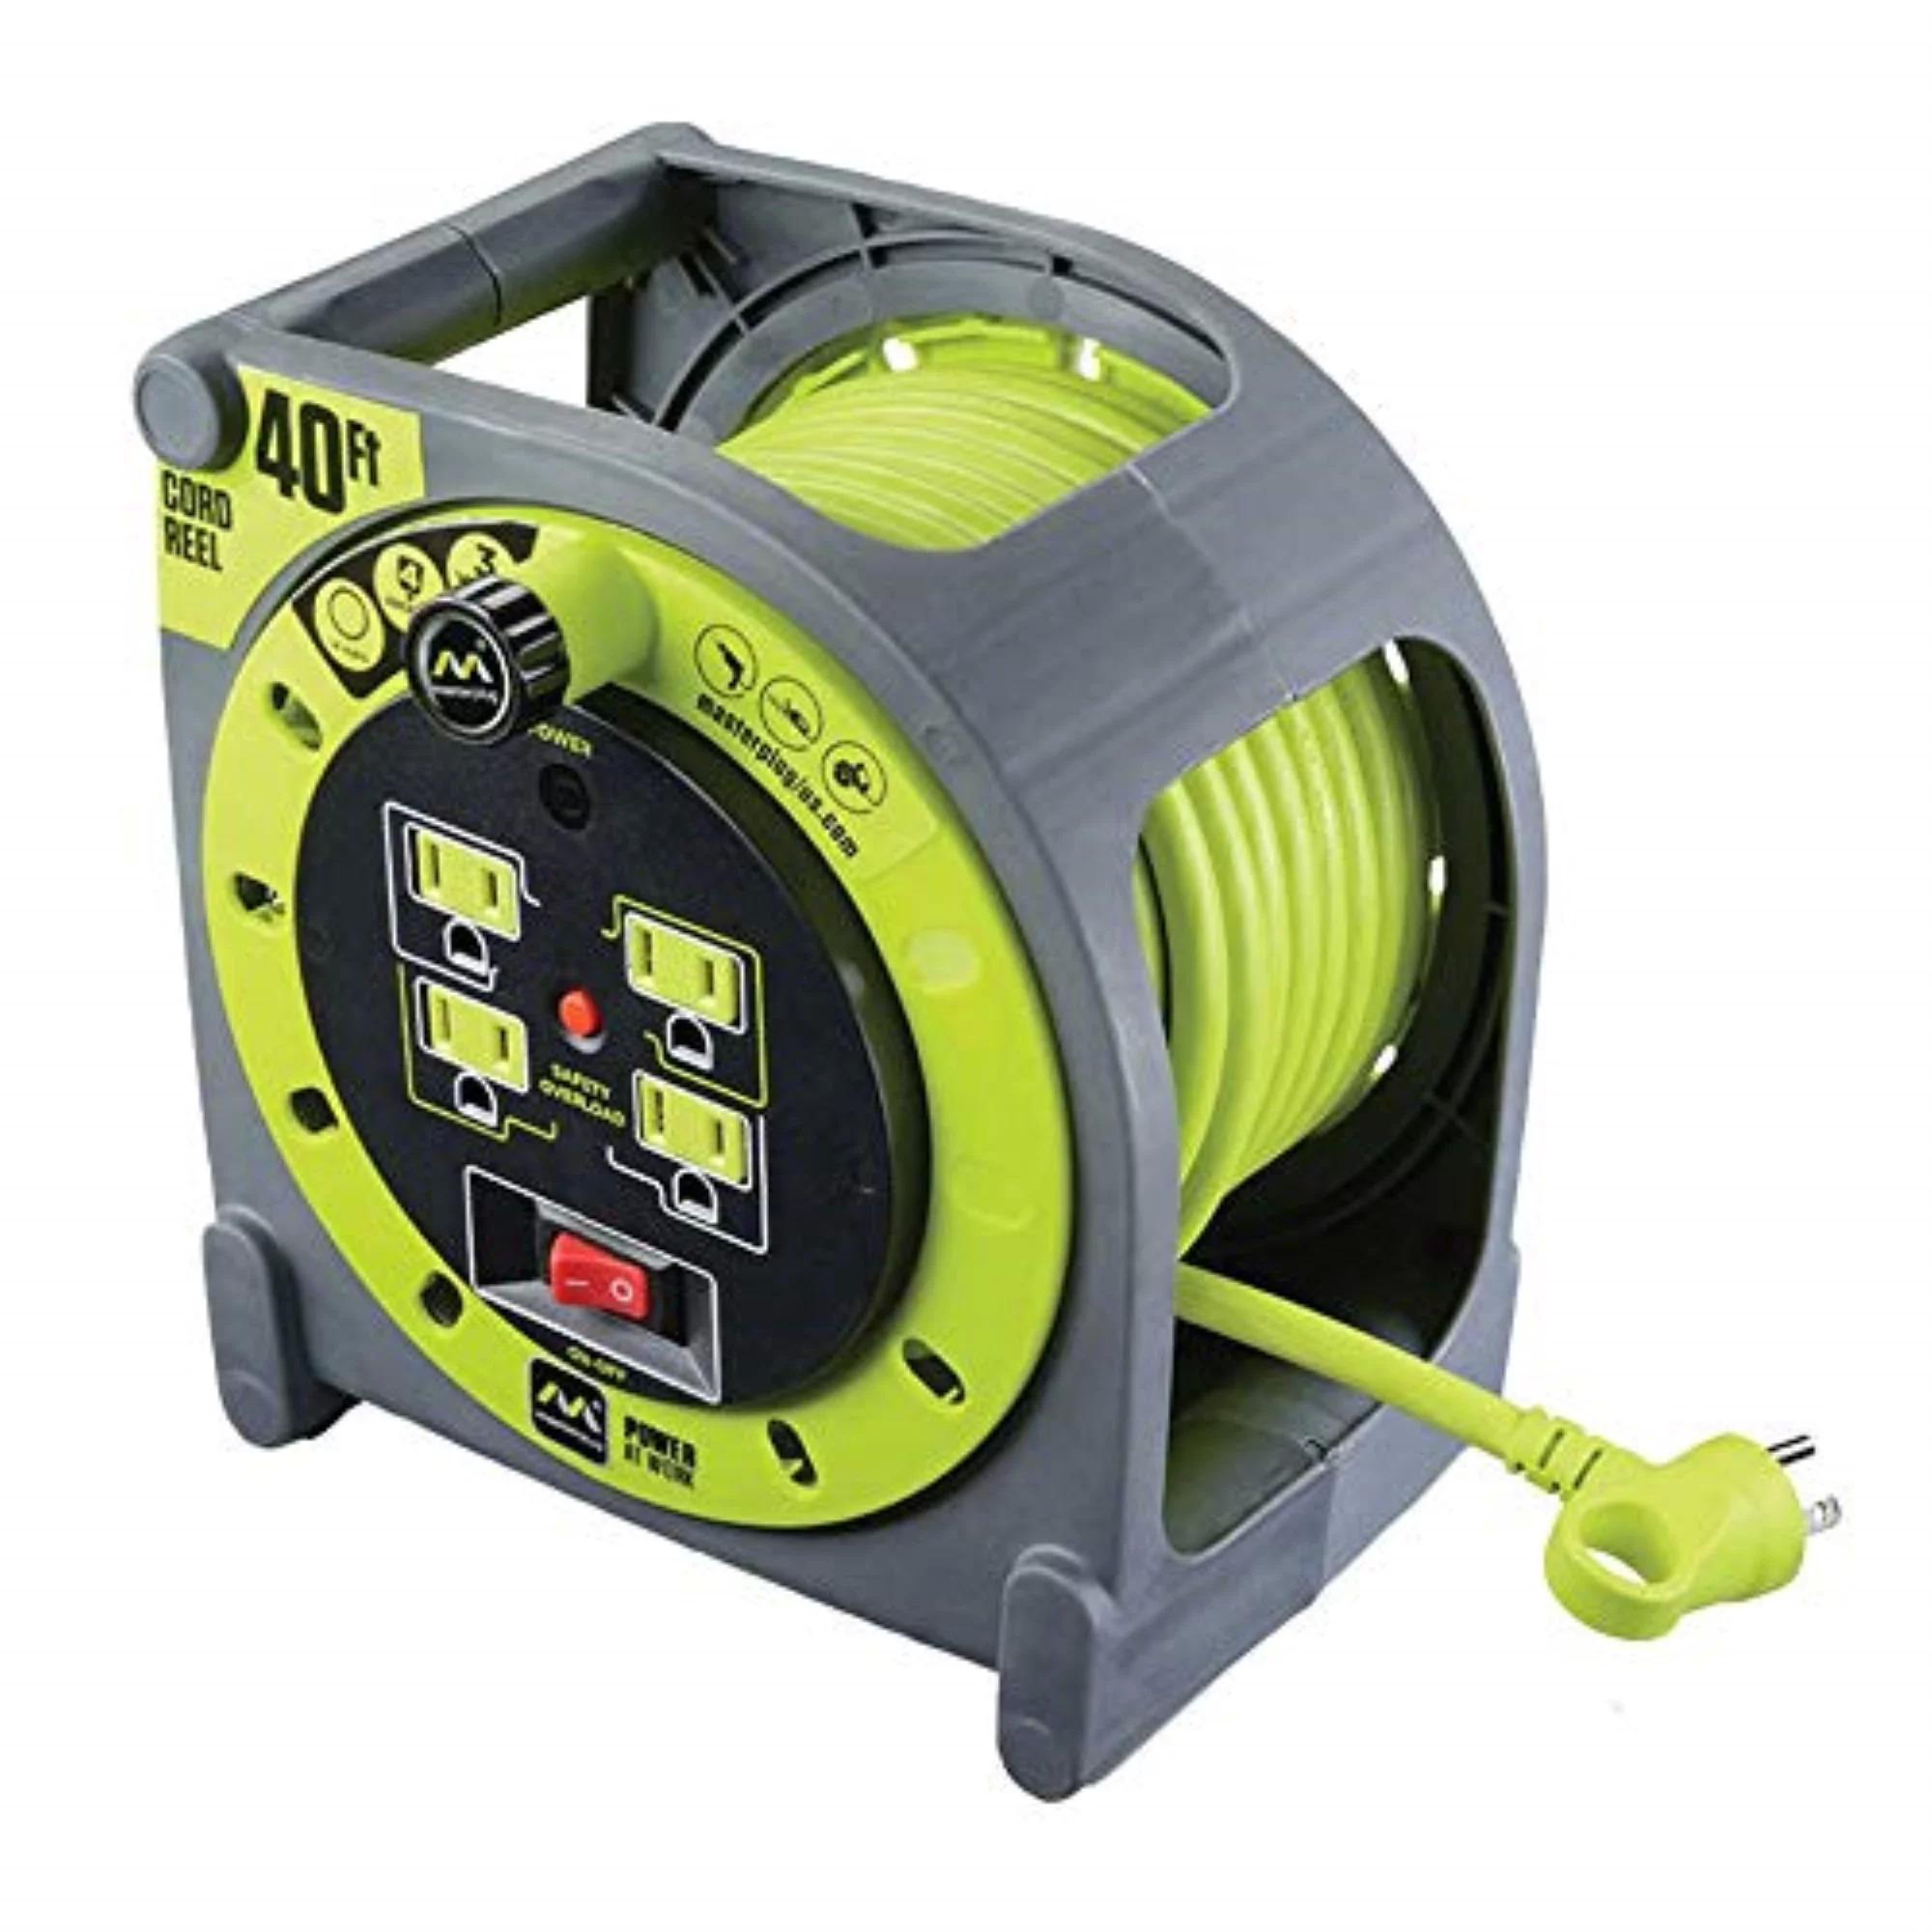 MasterPlug 40ft Heavy Duty Extension Cord Reel for $29.99